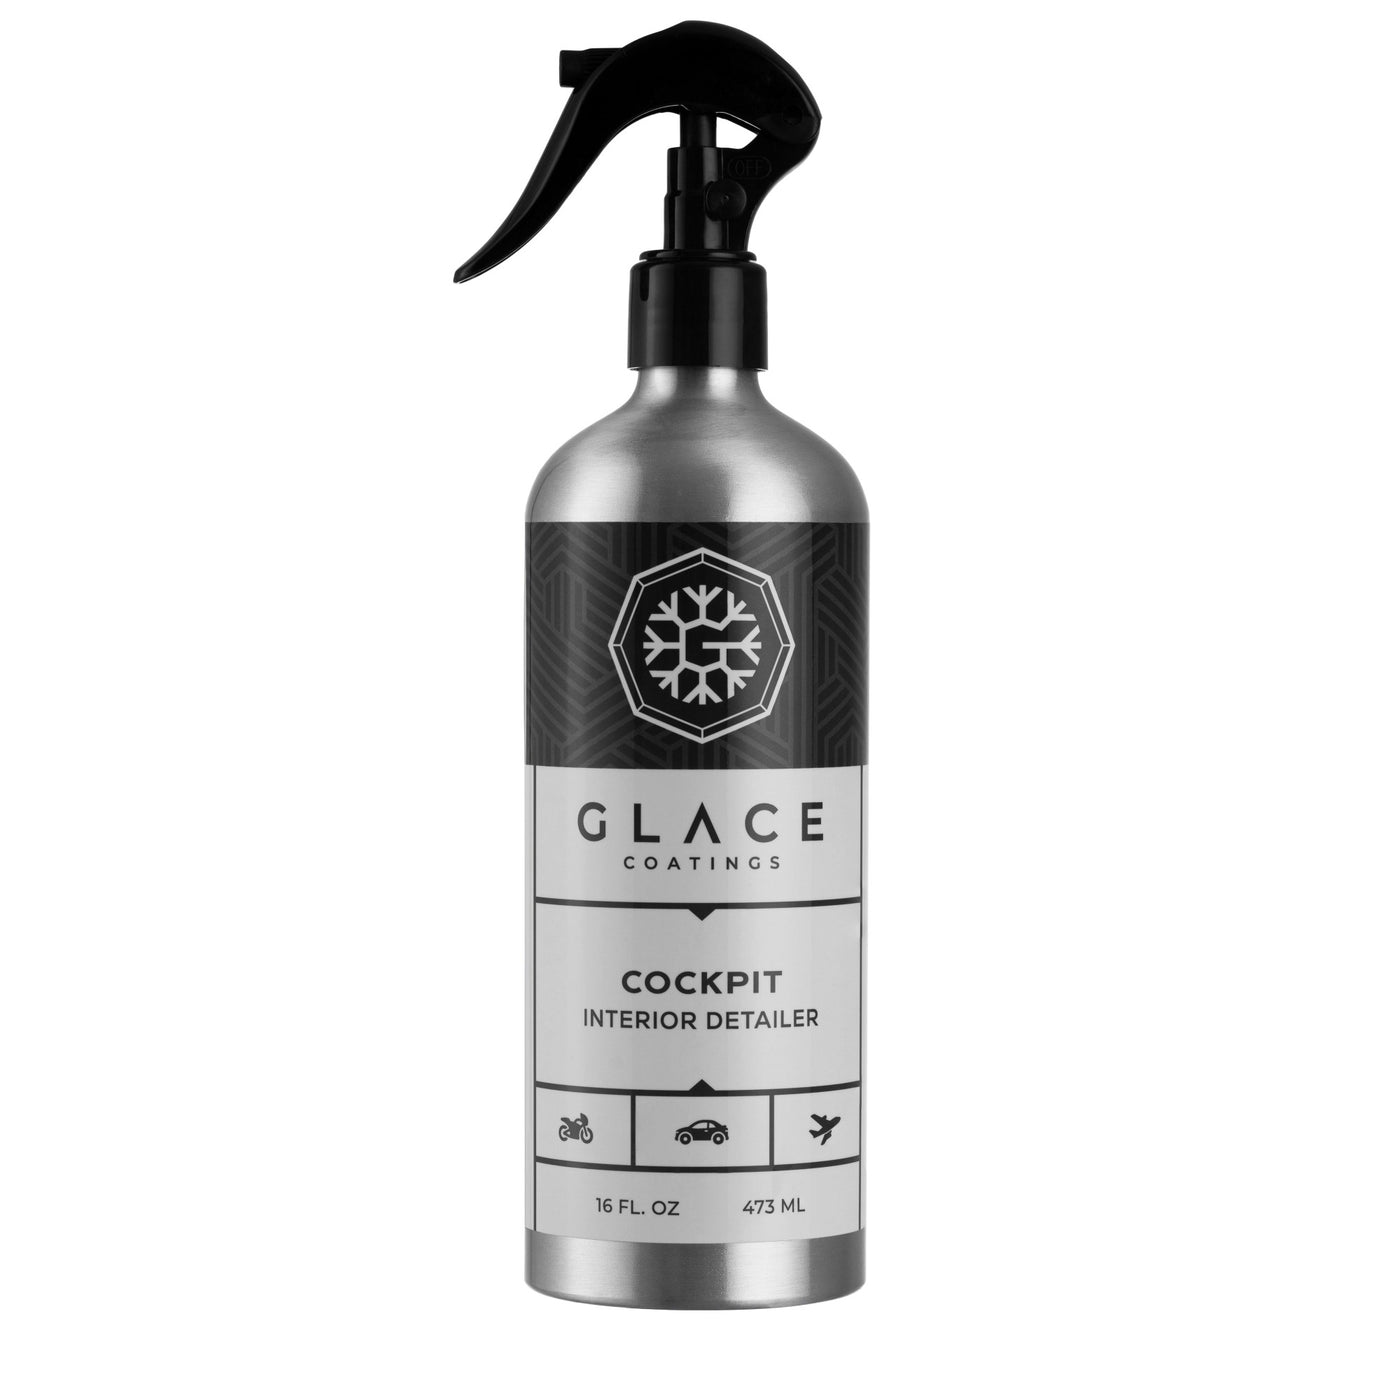 Glace Coatings Cockpit aluminum bottle with a white label and black text